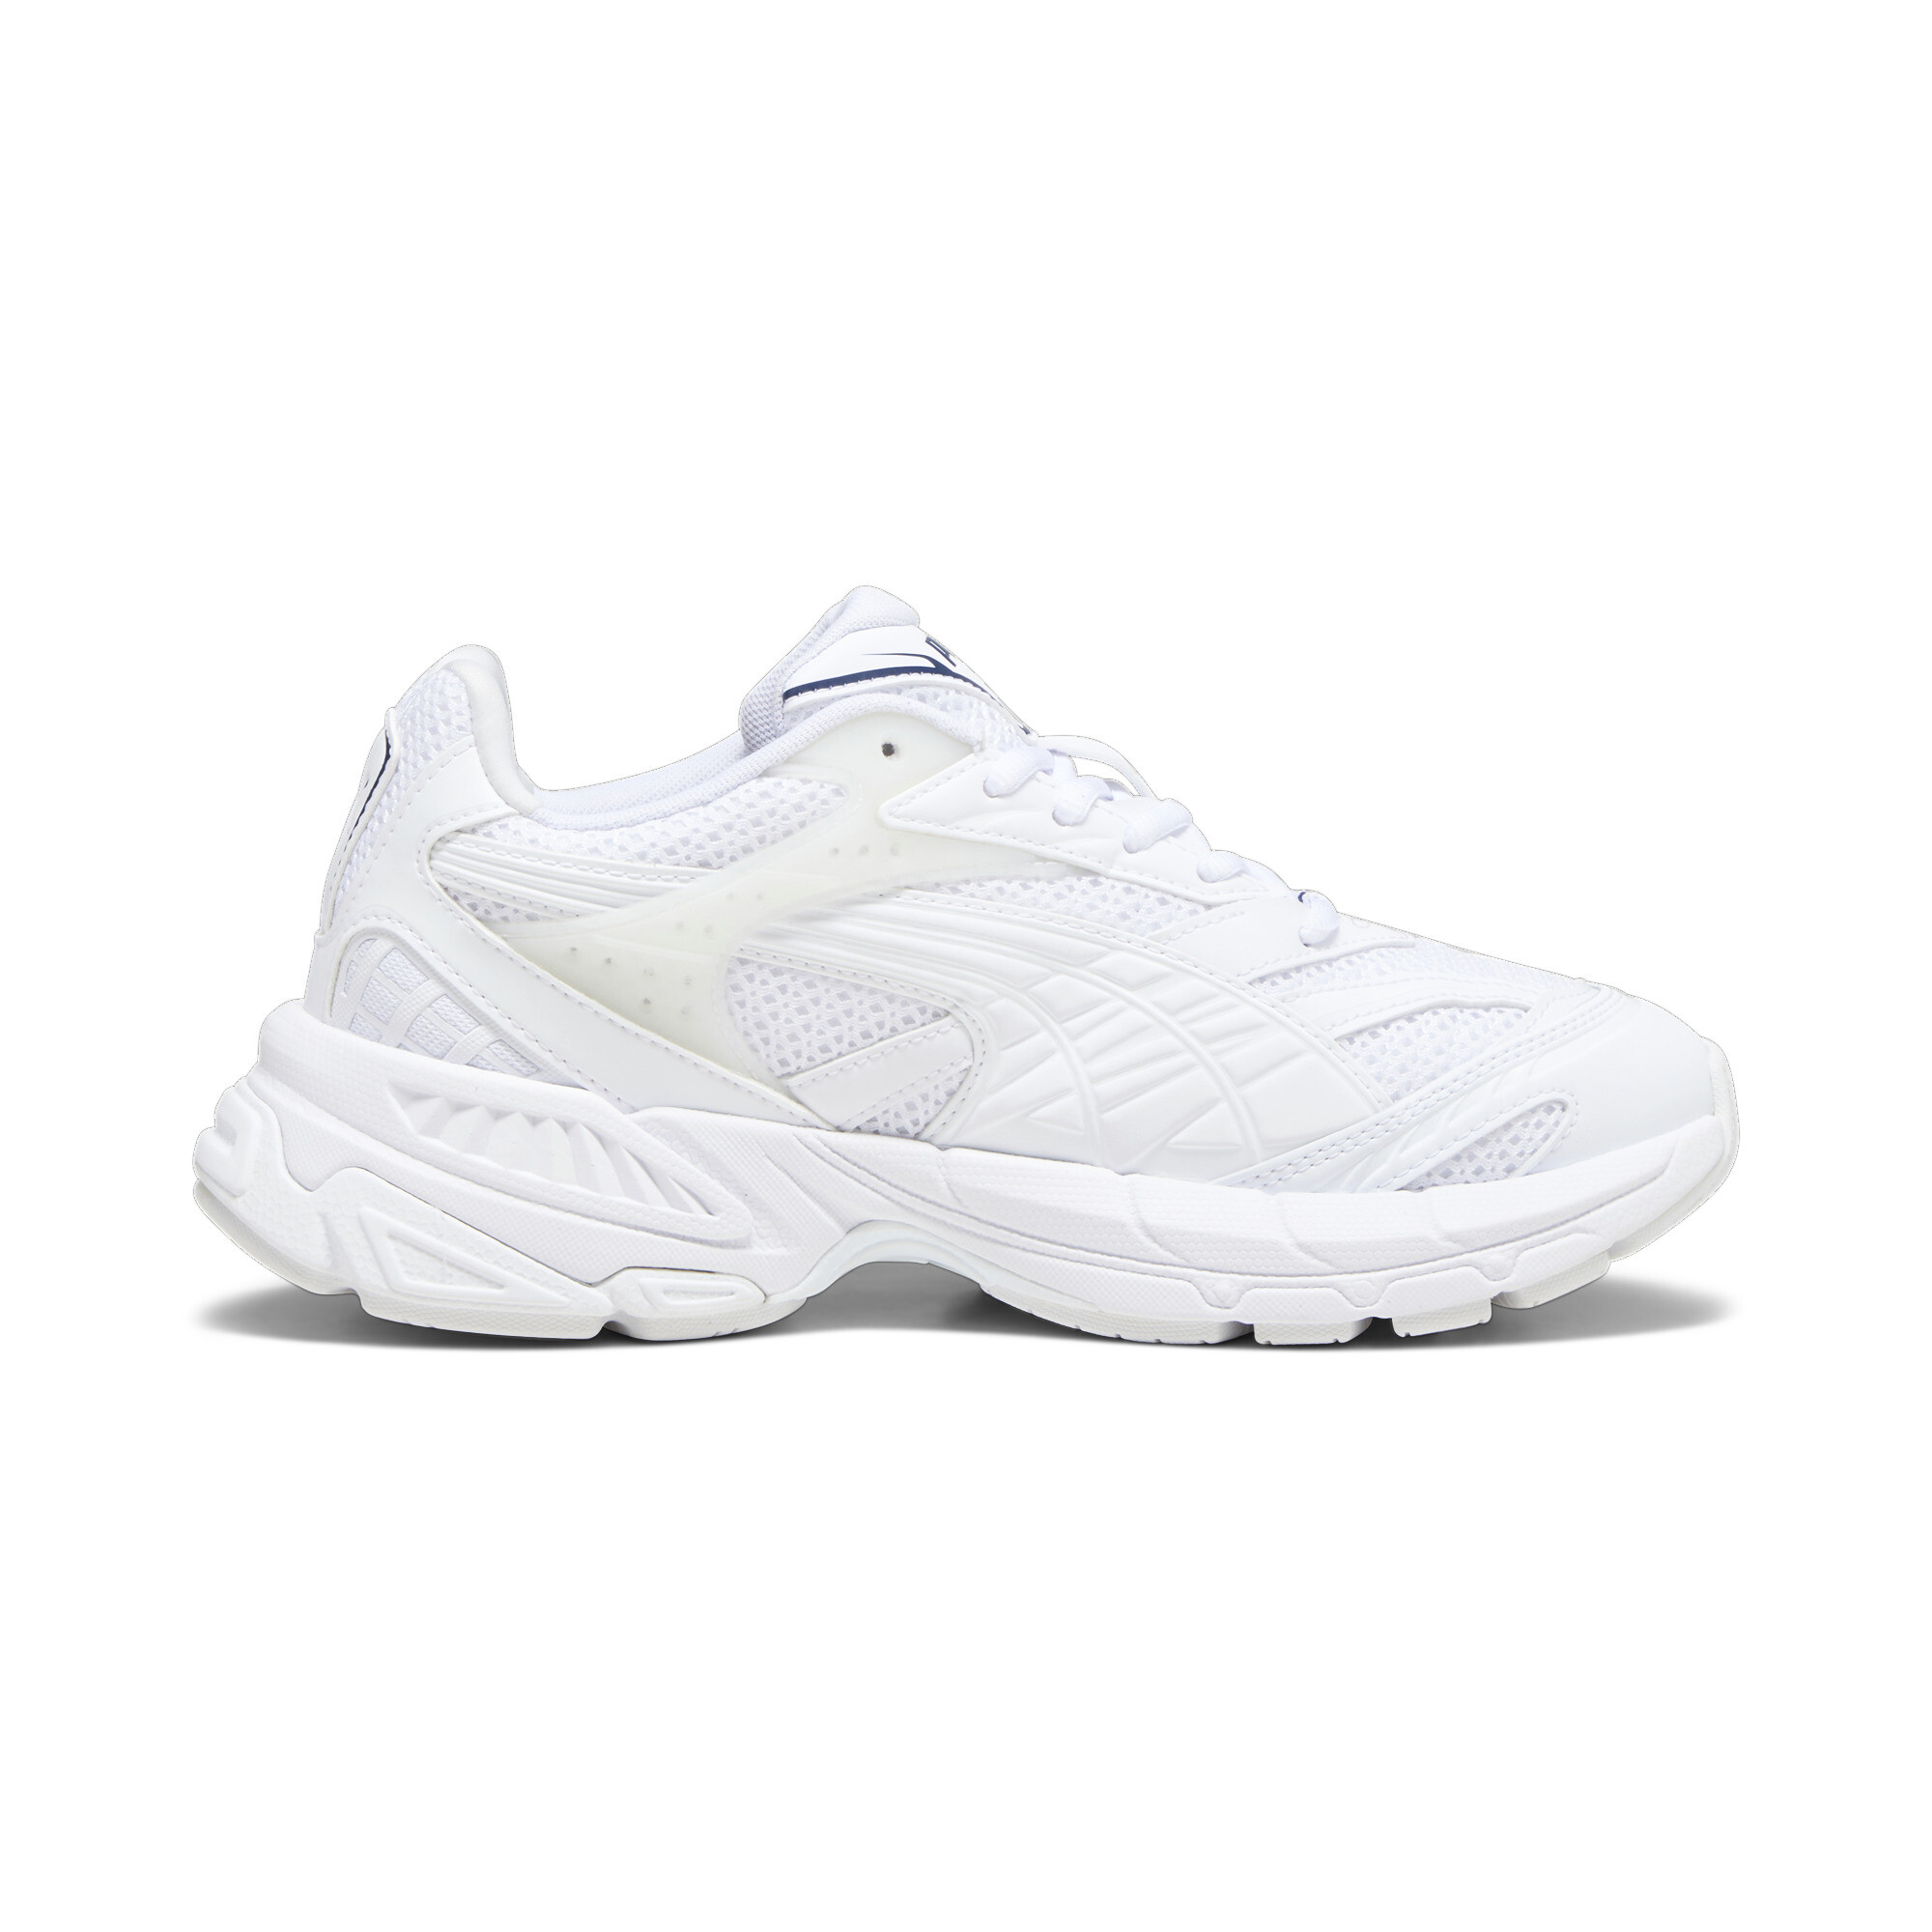 Puma Velophasis Technisch Sneakers, White, Size 36, Shoes